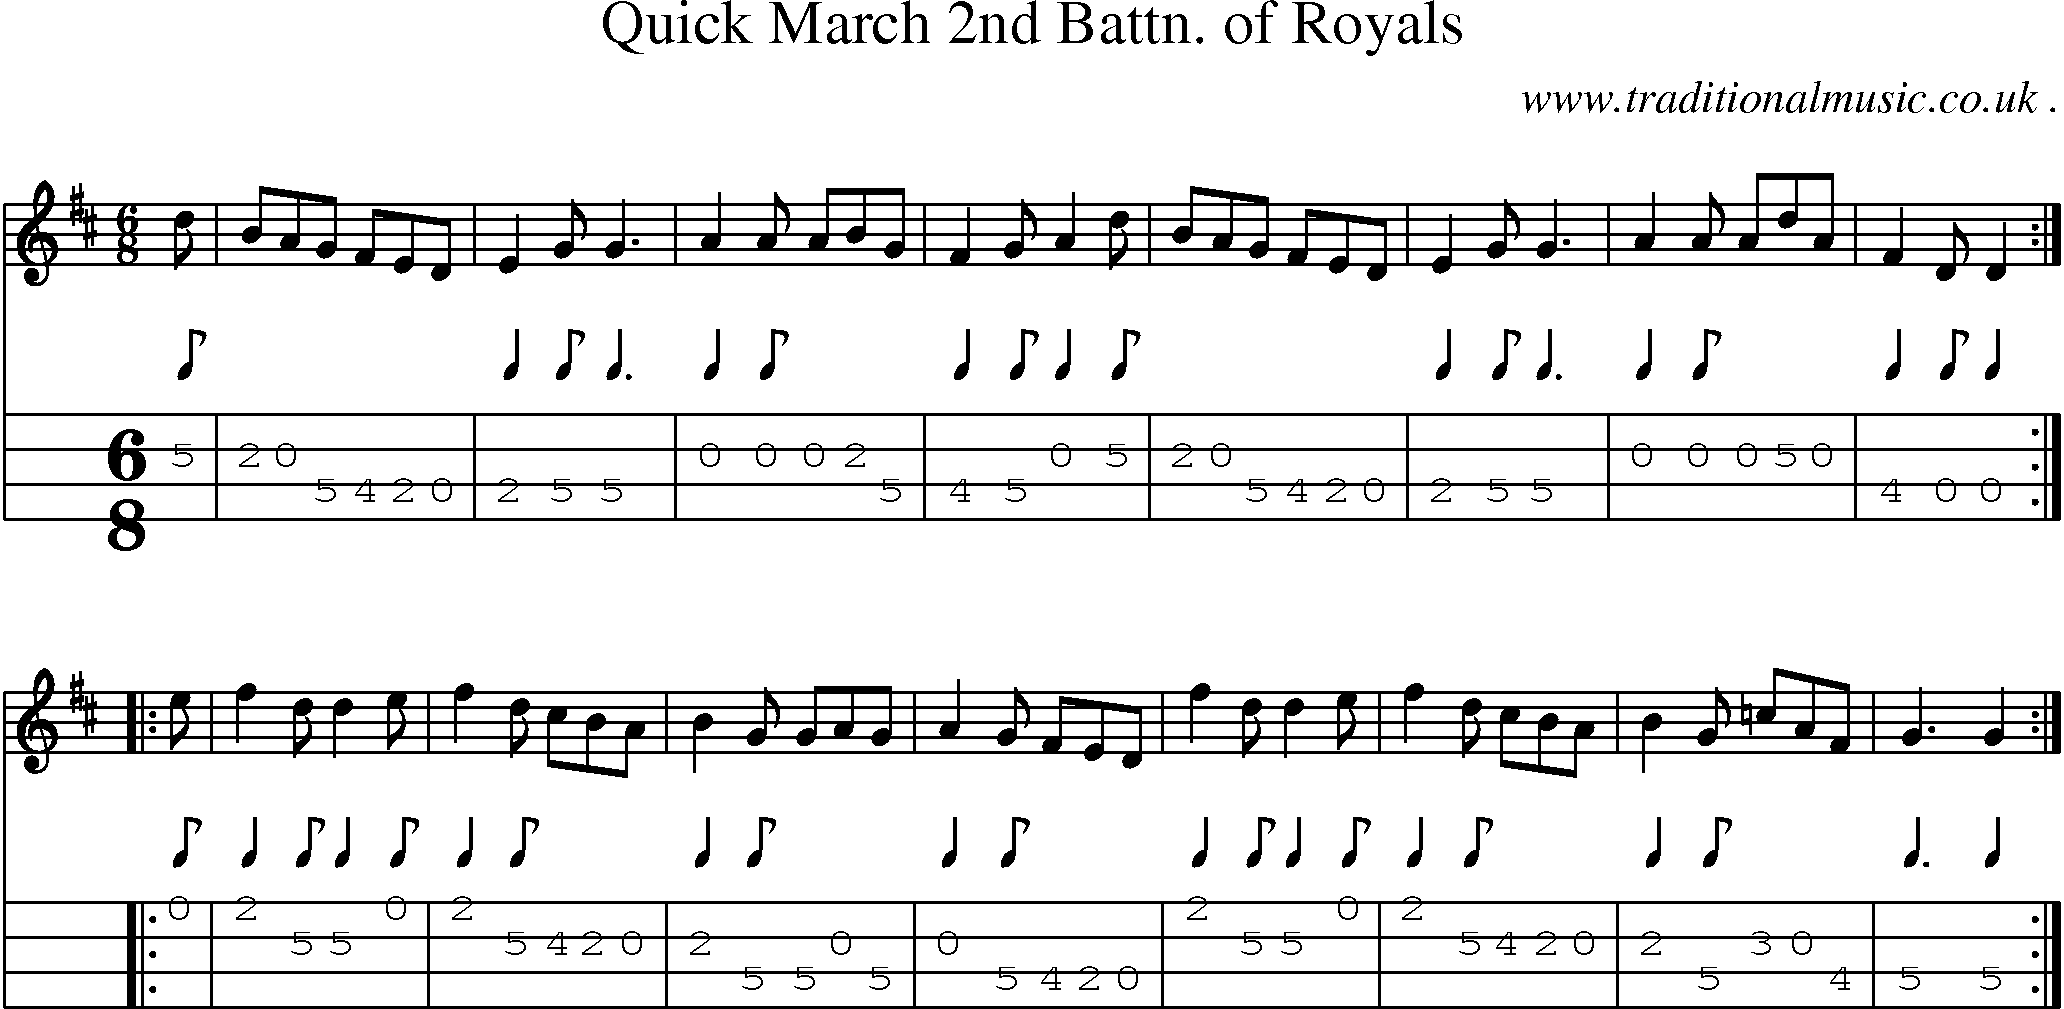 Sheet-music  score, Chords and Mandolin Tabs for Quick March 2nd Battn Of Royals